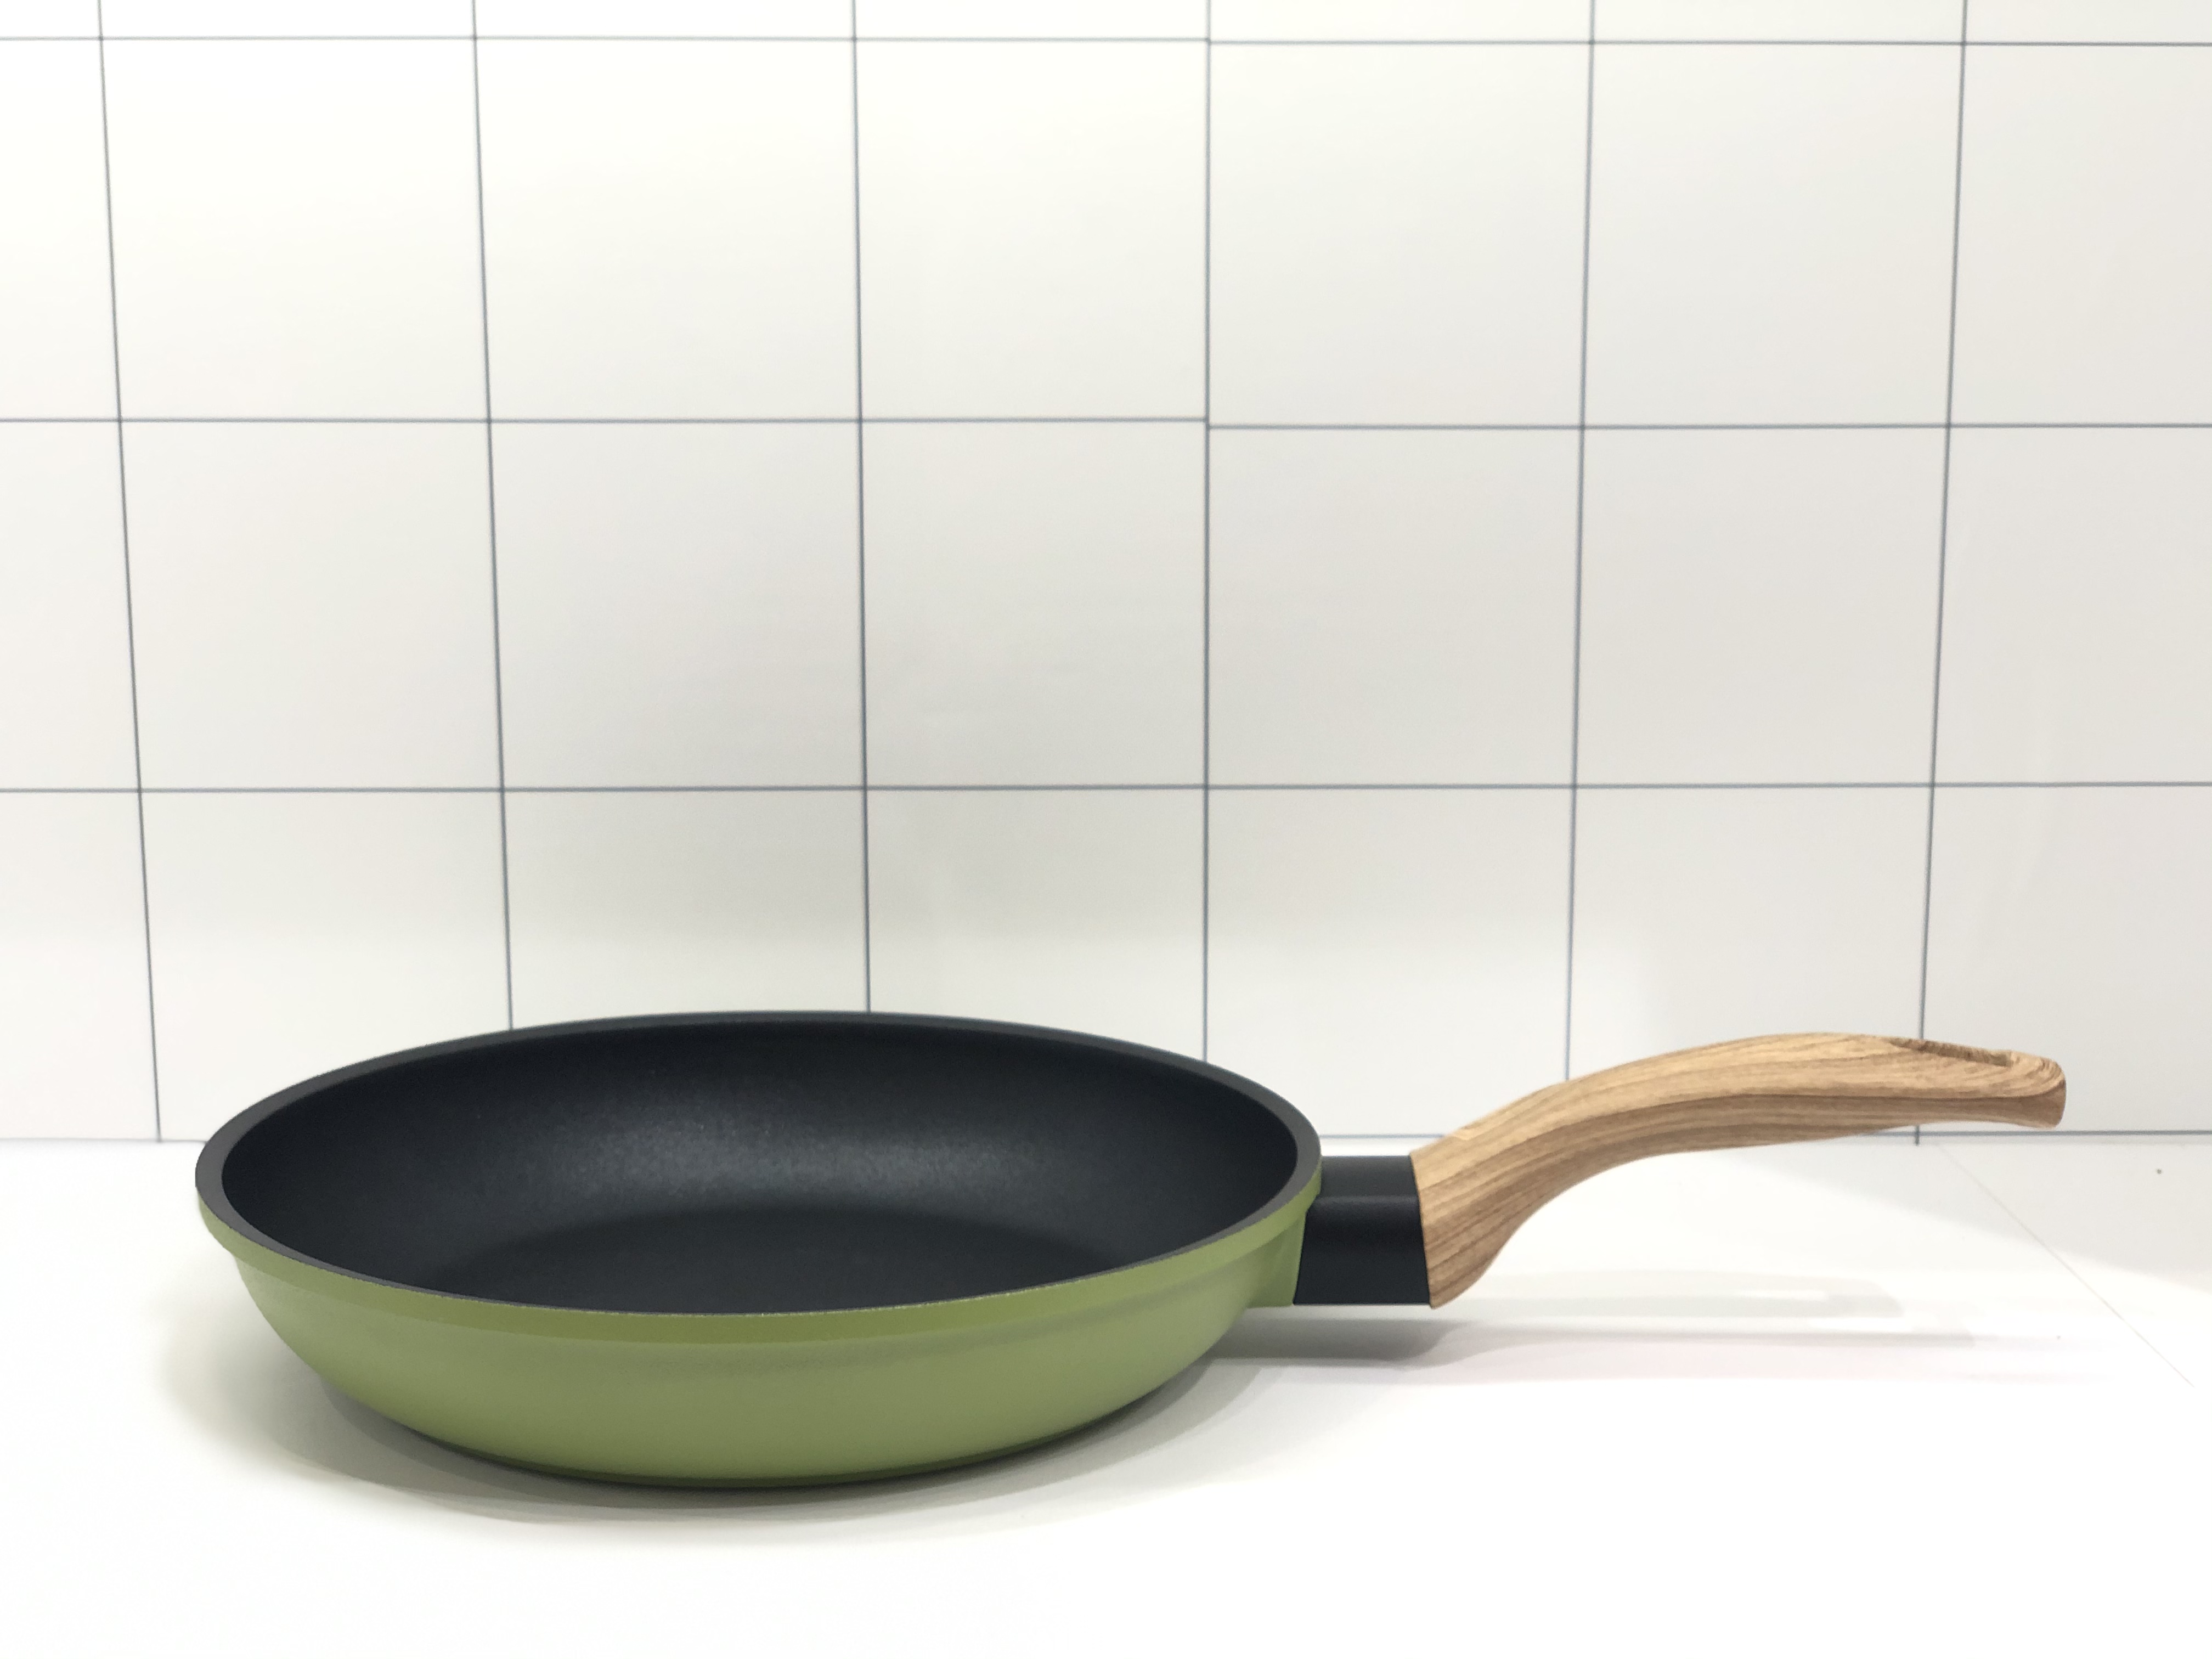 About the size of the fry pan